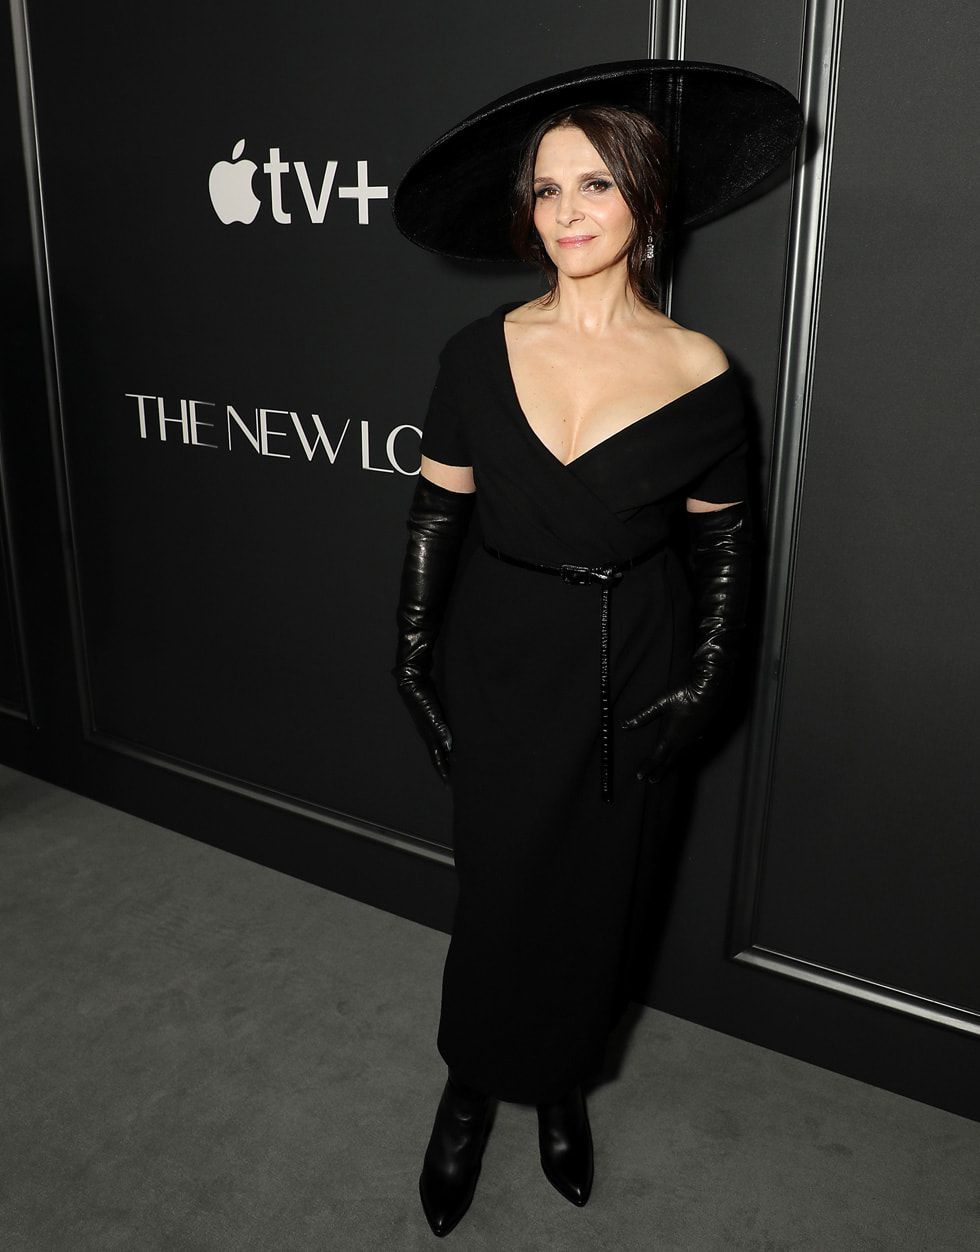 Juliette Binoche attends the premiere of the Apple TV+ thrilling series “The New Look” at Florence Gould Hall. “The New Look” will make its global debut on Apple TV+ on Wednesday, February 14, 2024.